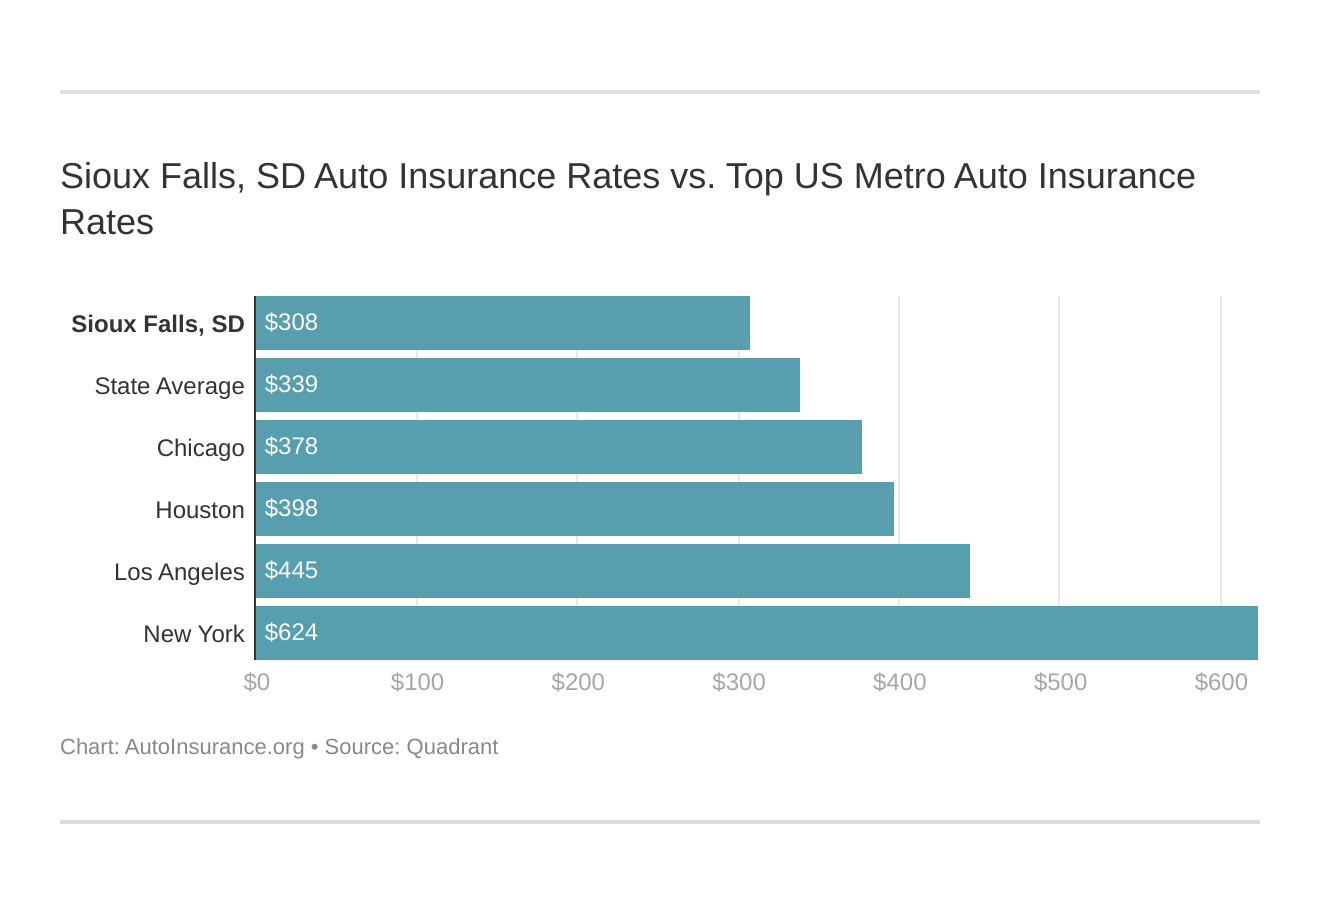 Sioux Falls, SD Auto Insurance Rates vs. Top US Metro Auto Insurance Rates